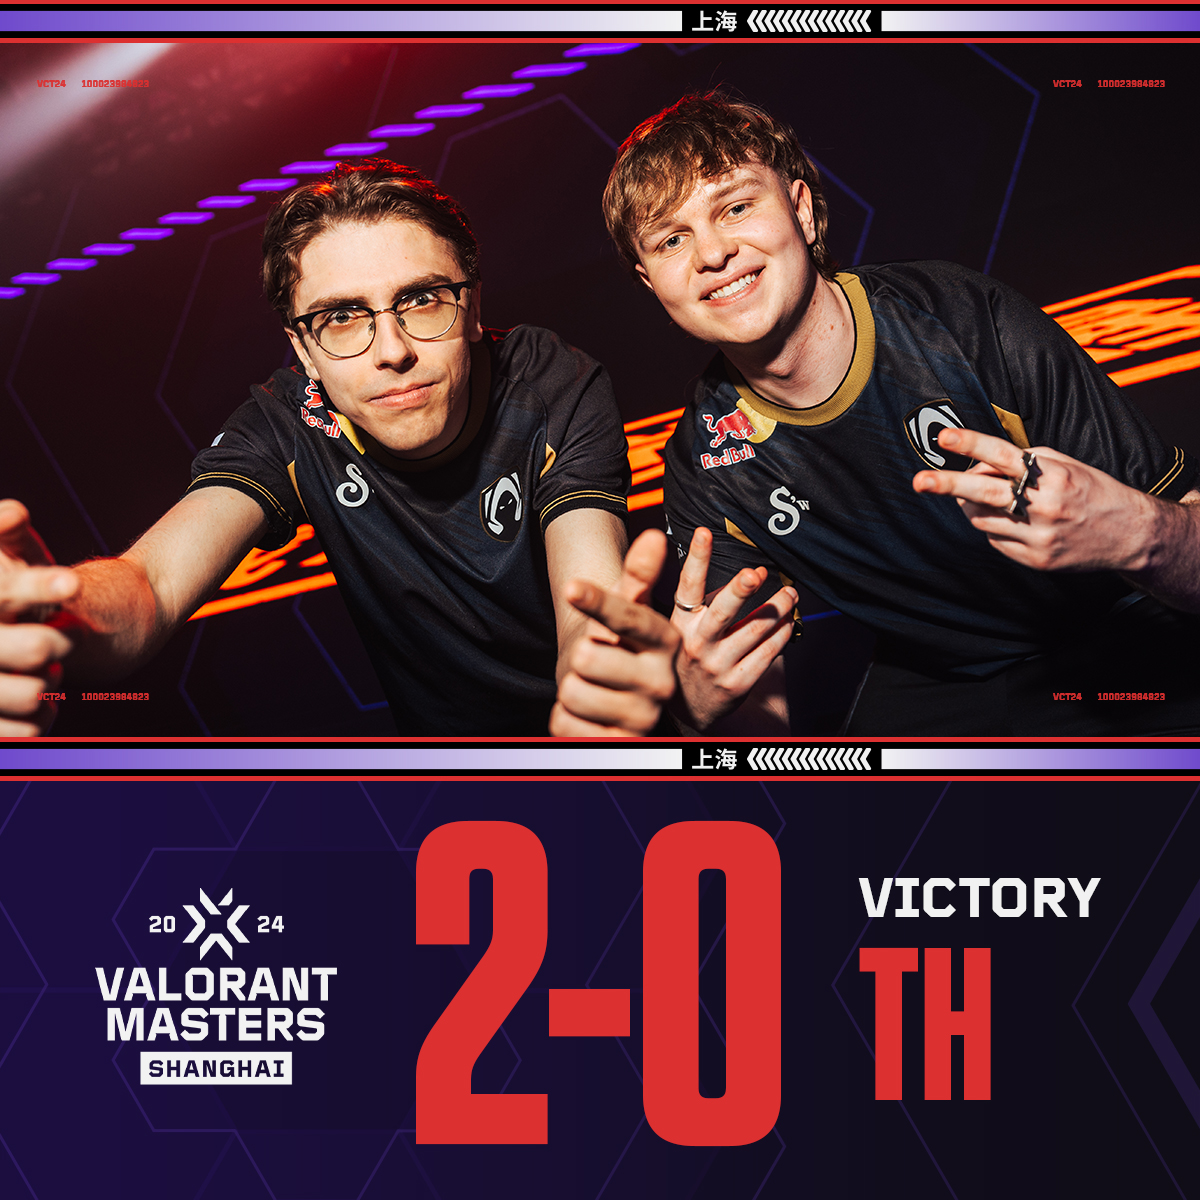 Team Heretics sweeps EDG in front of the Shanghai home crowd. #VALORANTMasters